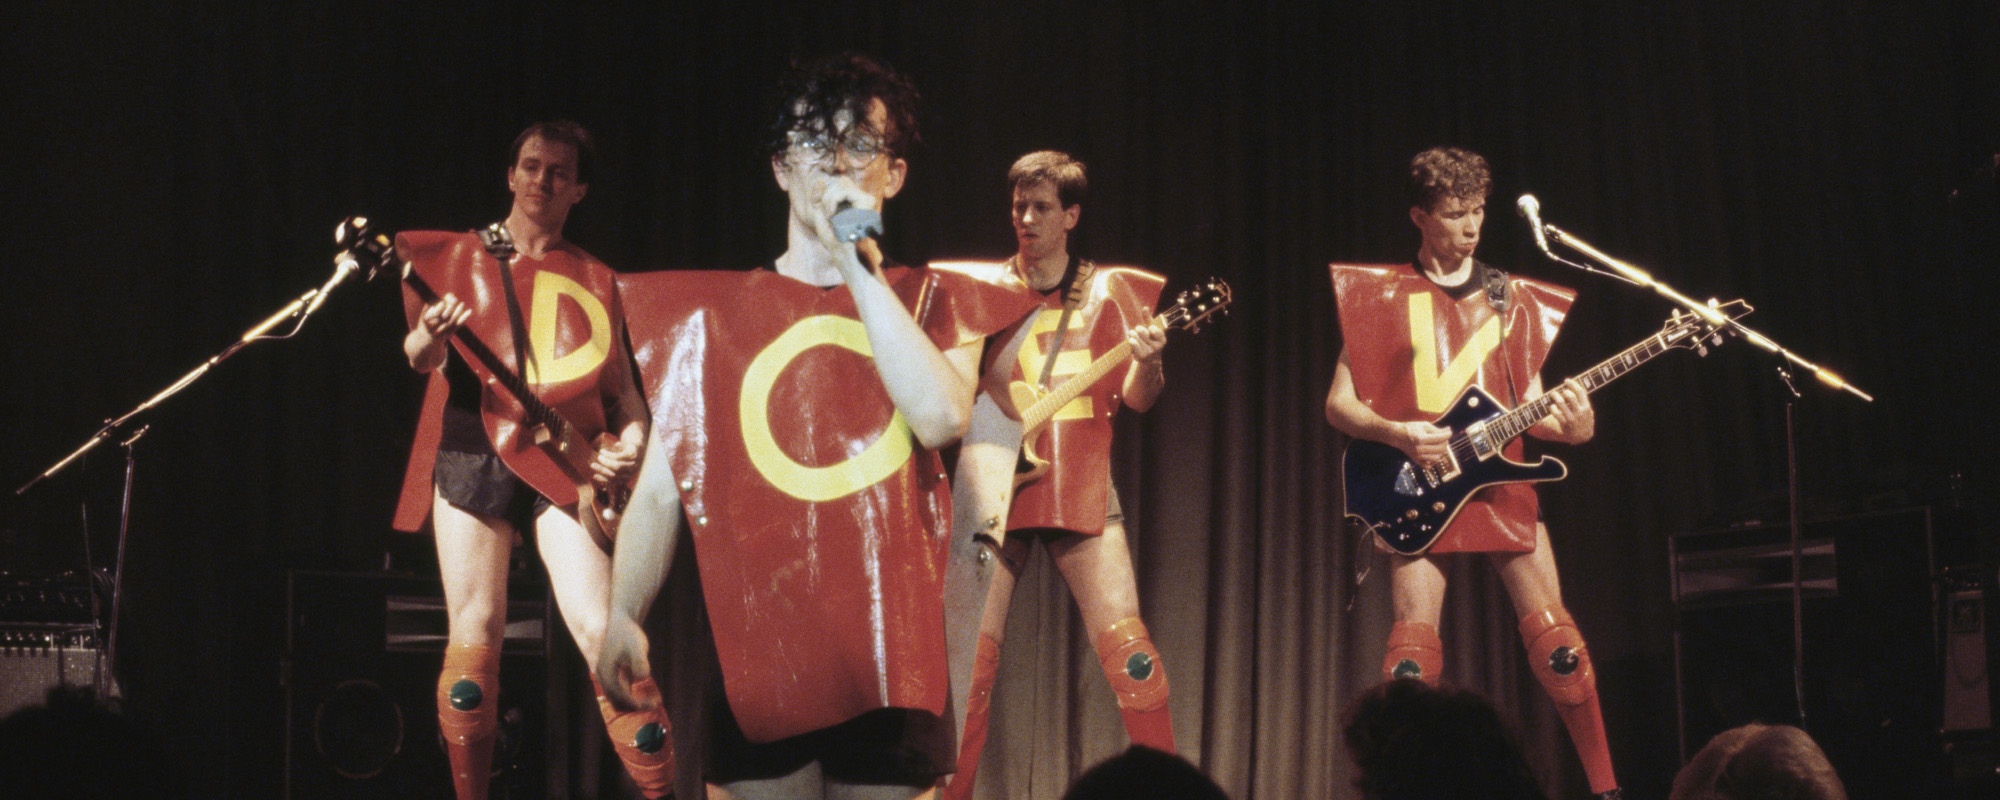 The Stories Behind 4 Distinctly Different Versions of Devo’s “Beautiful World”